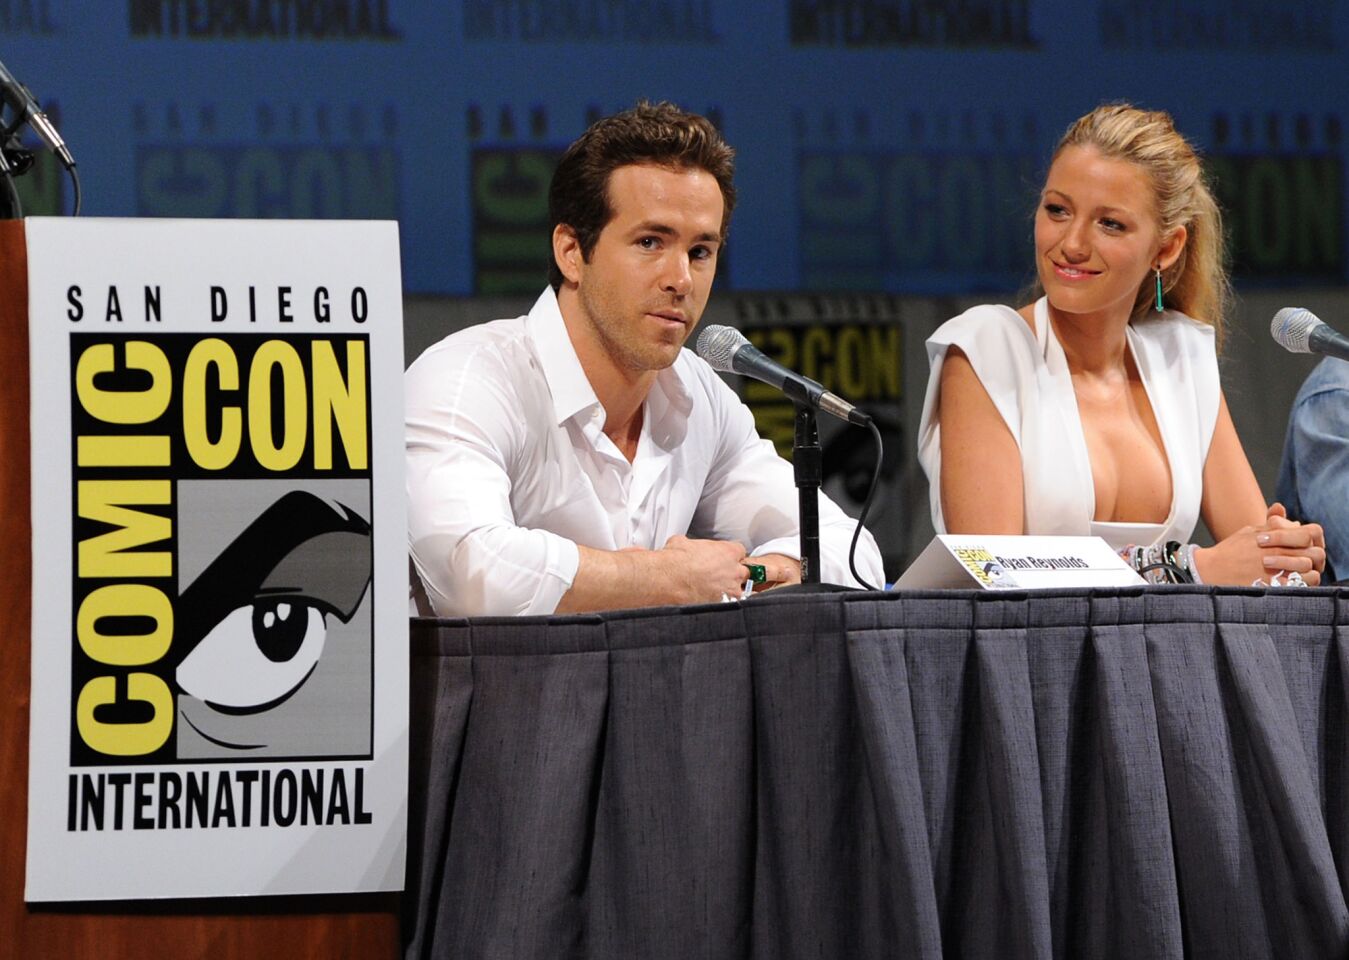 Ryan Reynolds and costar Blake Lively speak onstage at the "Green Lantern" panel discussion during Comic-Con 2010 at the San Diego Convention Center on July 24, 2010.